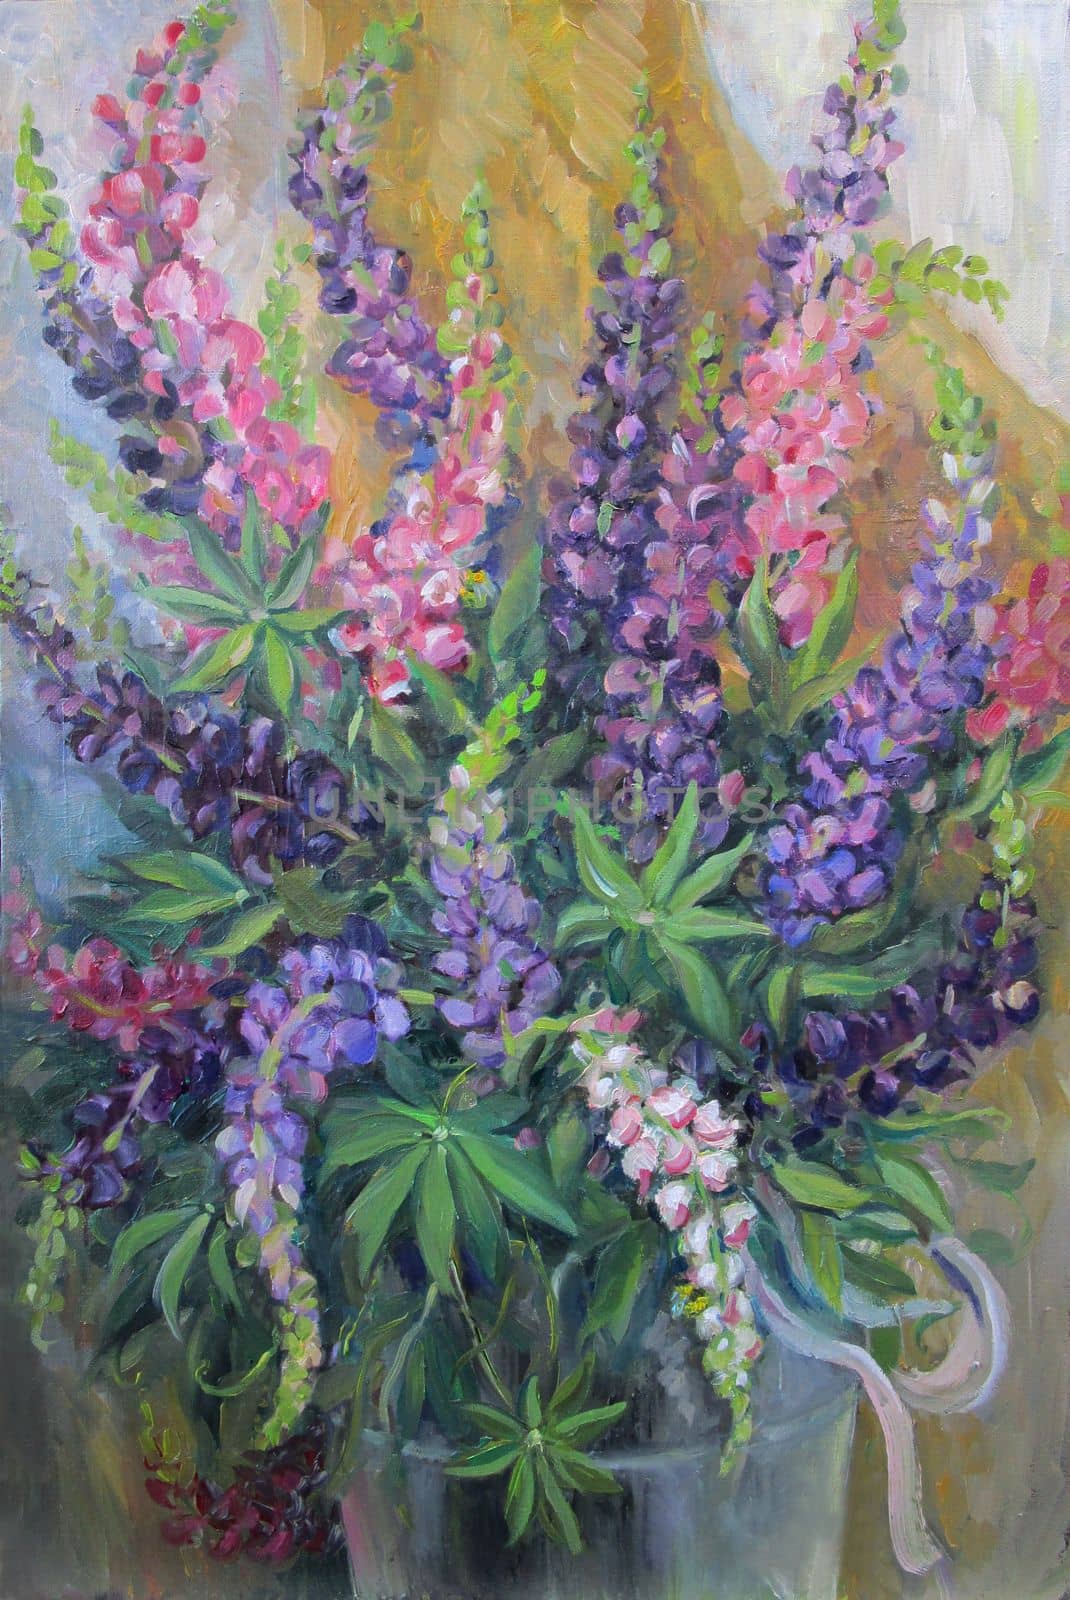 Bouquet of lupins, colorful summer still life